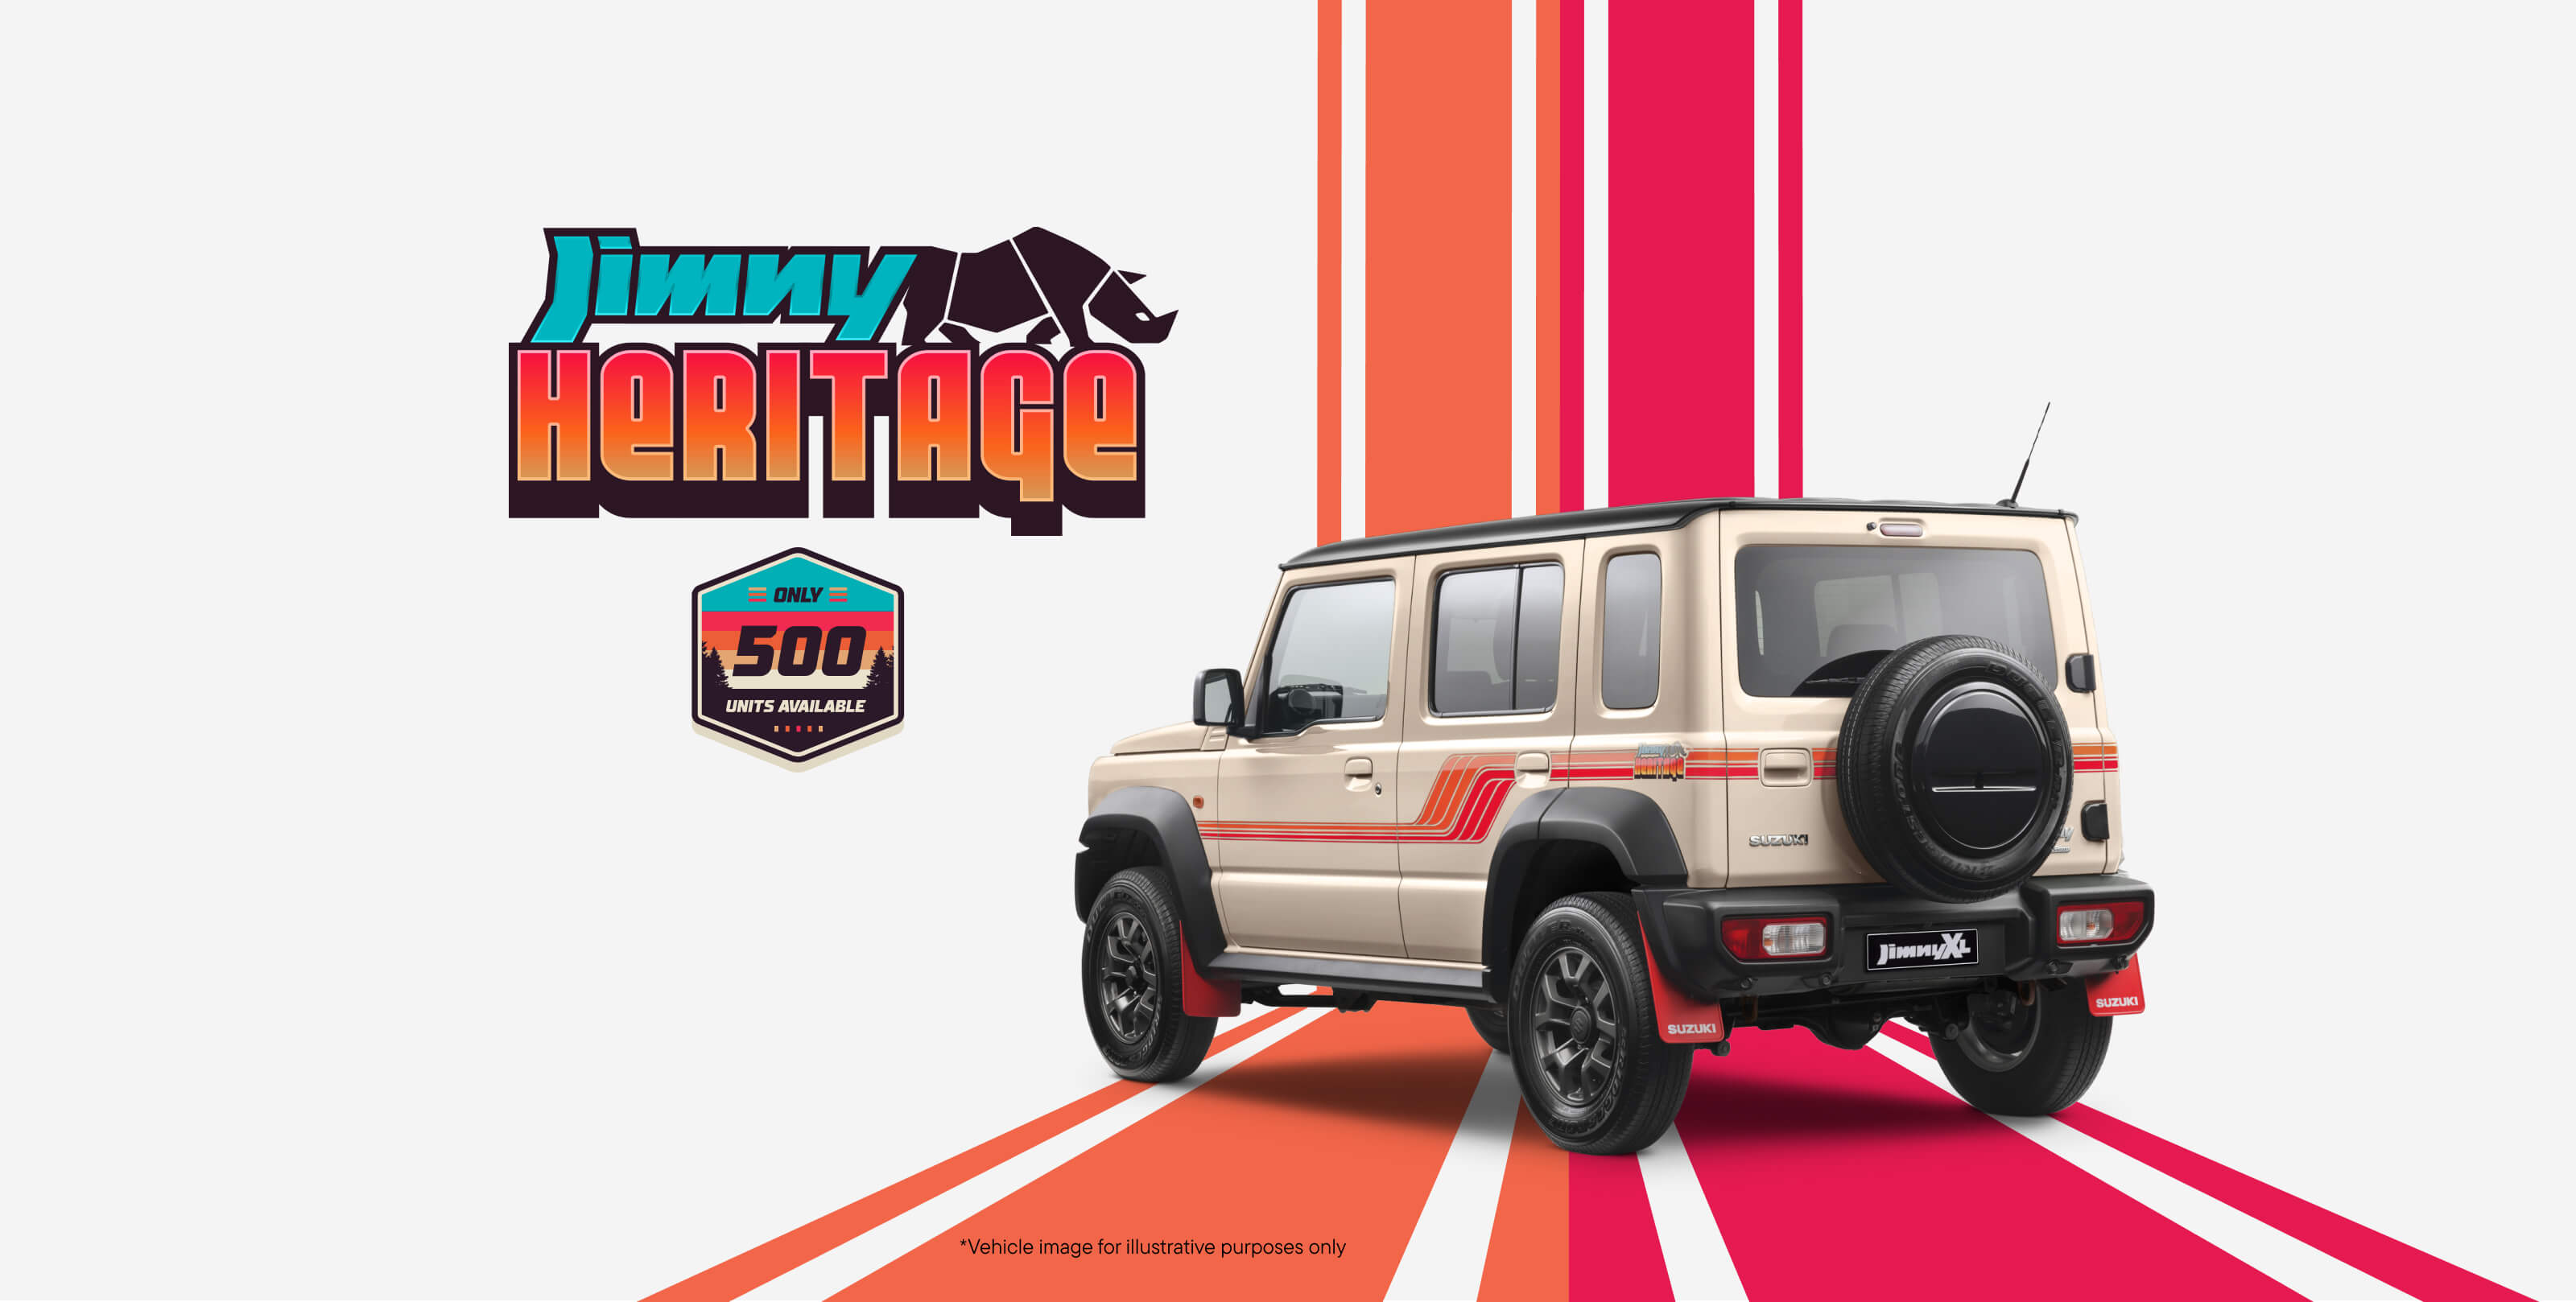 Jimny Heritage - Only 500 units available - *Vehicle image for illustrative purposes only